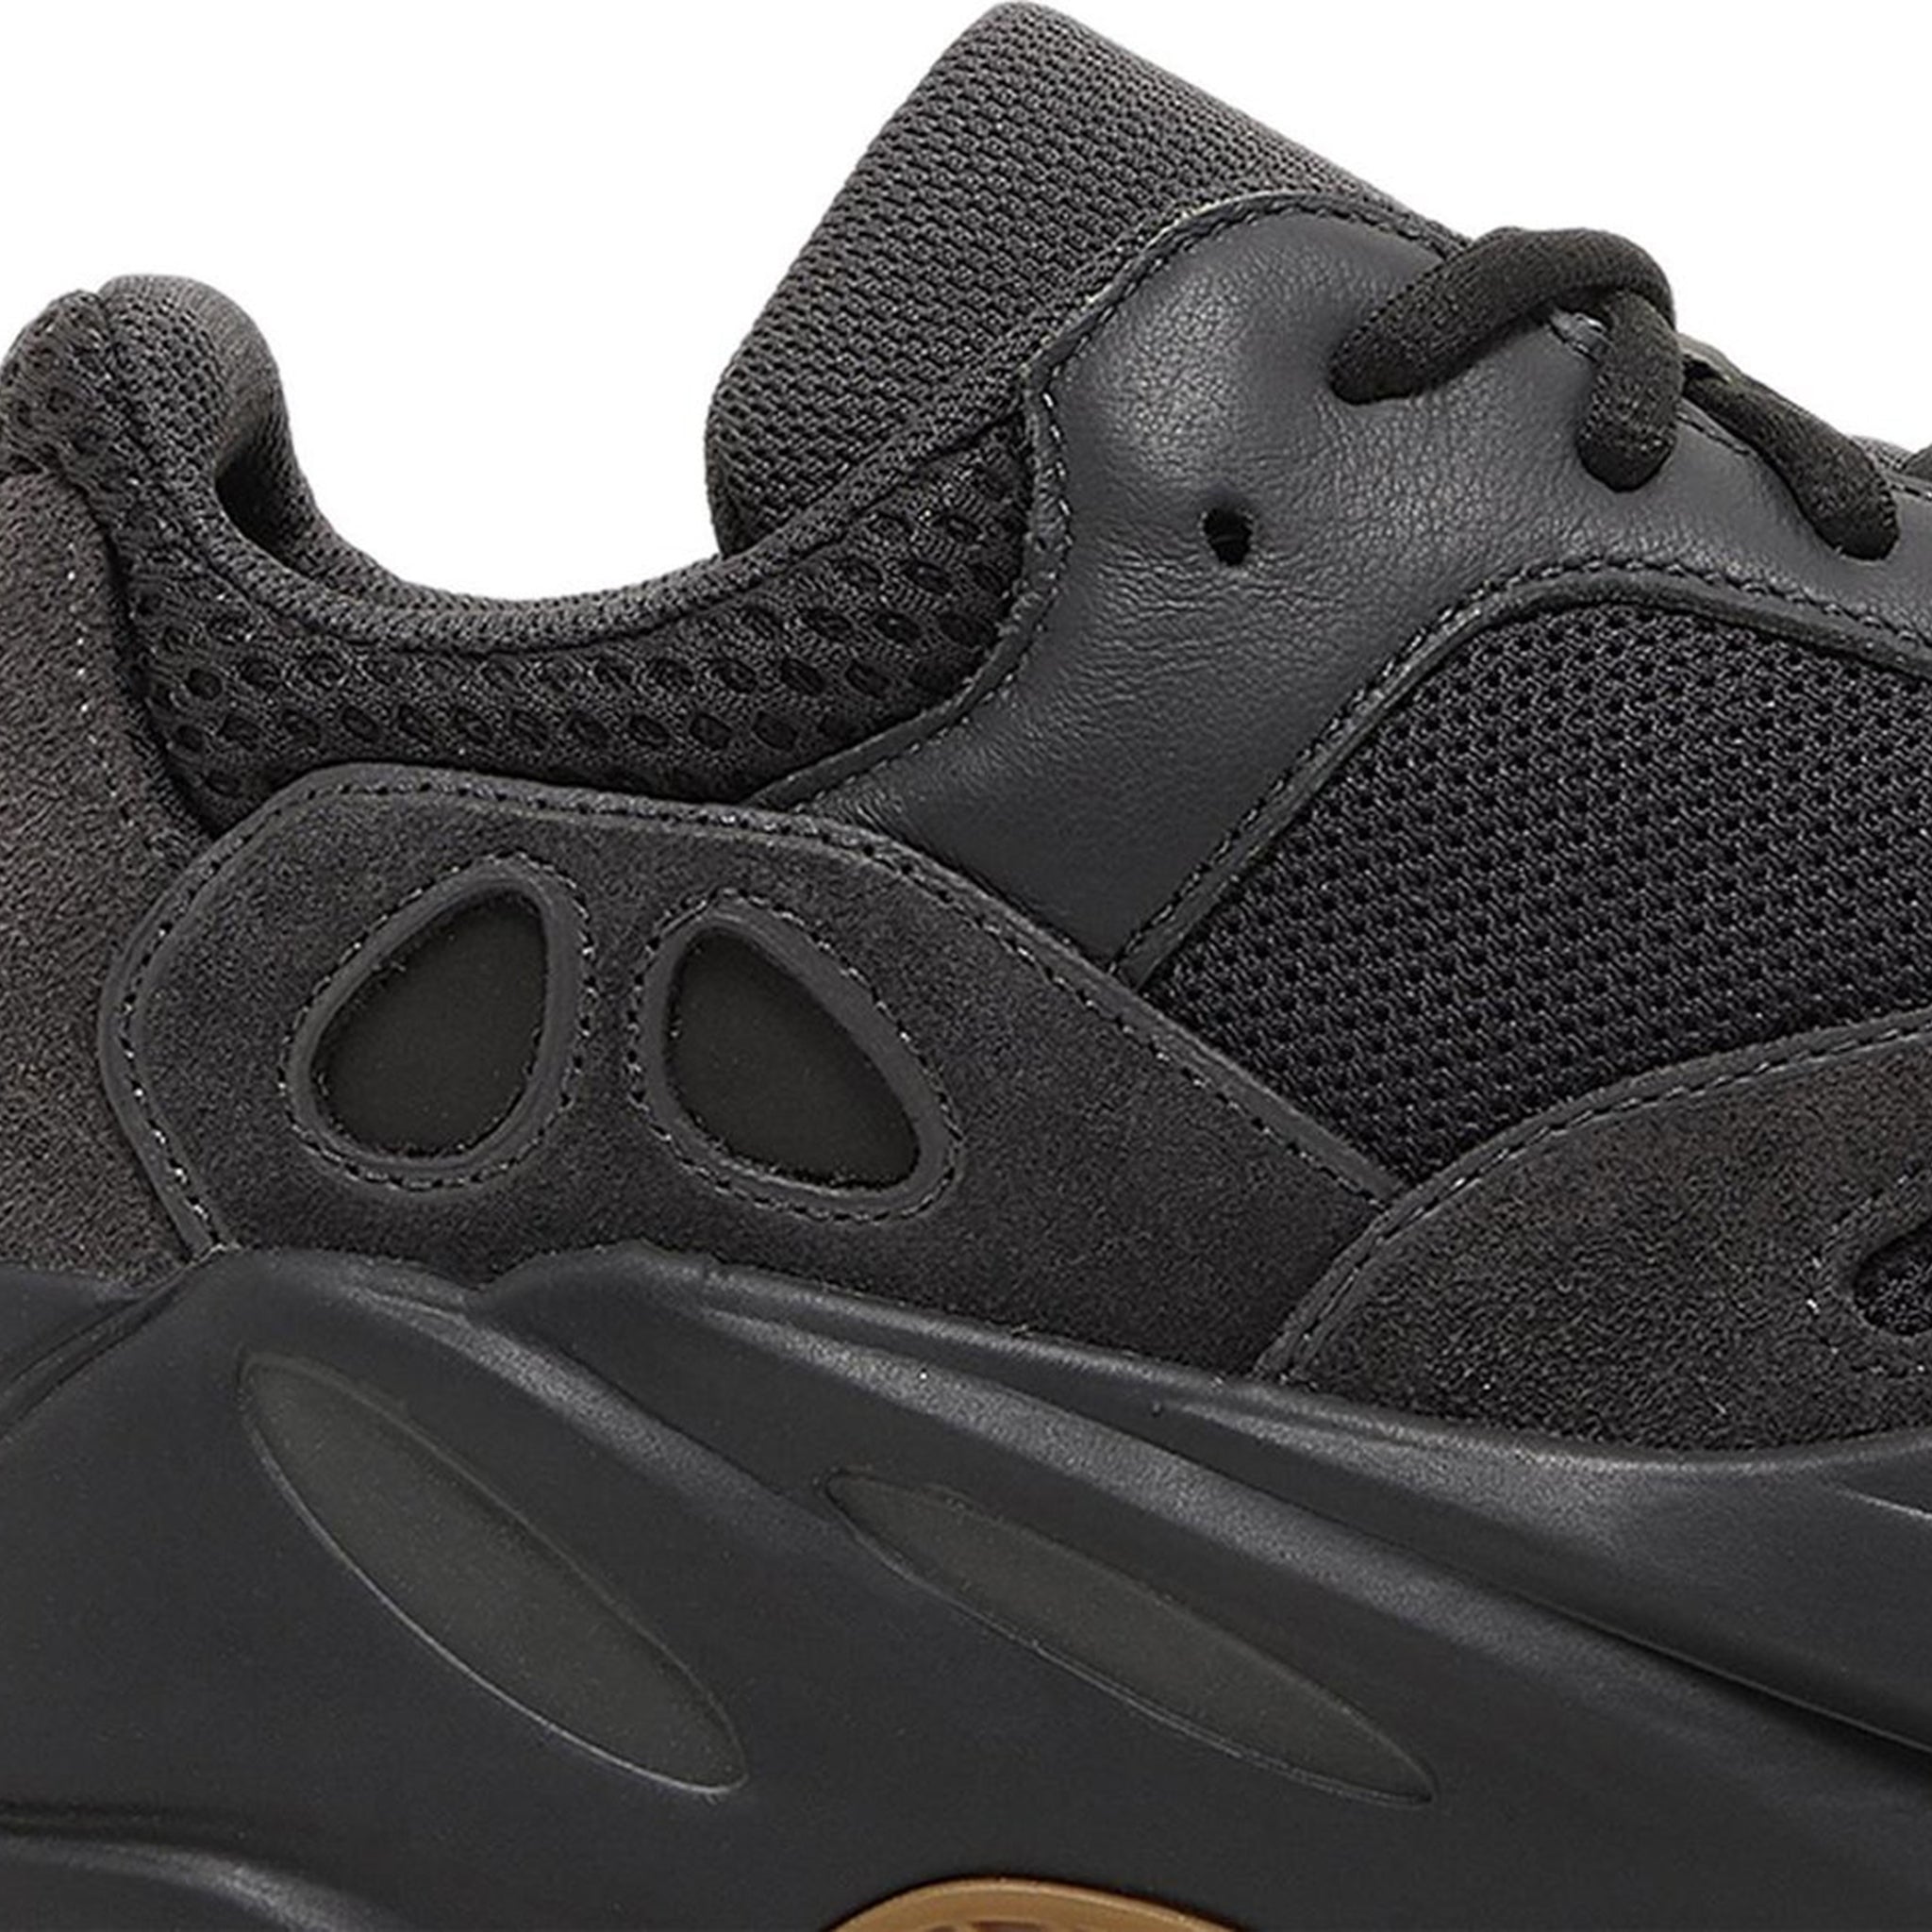 Detail view of Adidas Yeezy Boost 700 Utility Black (2019/2023) FV5304